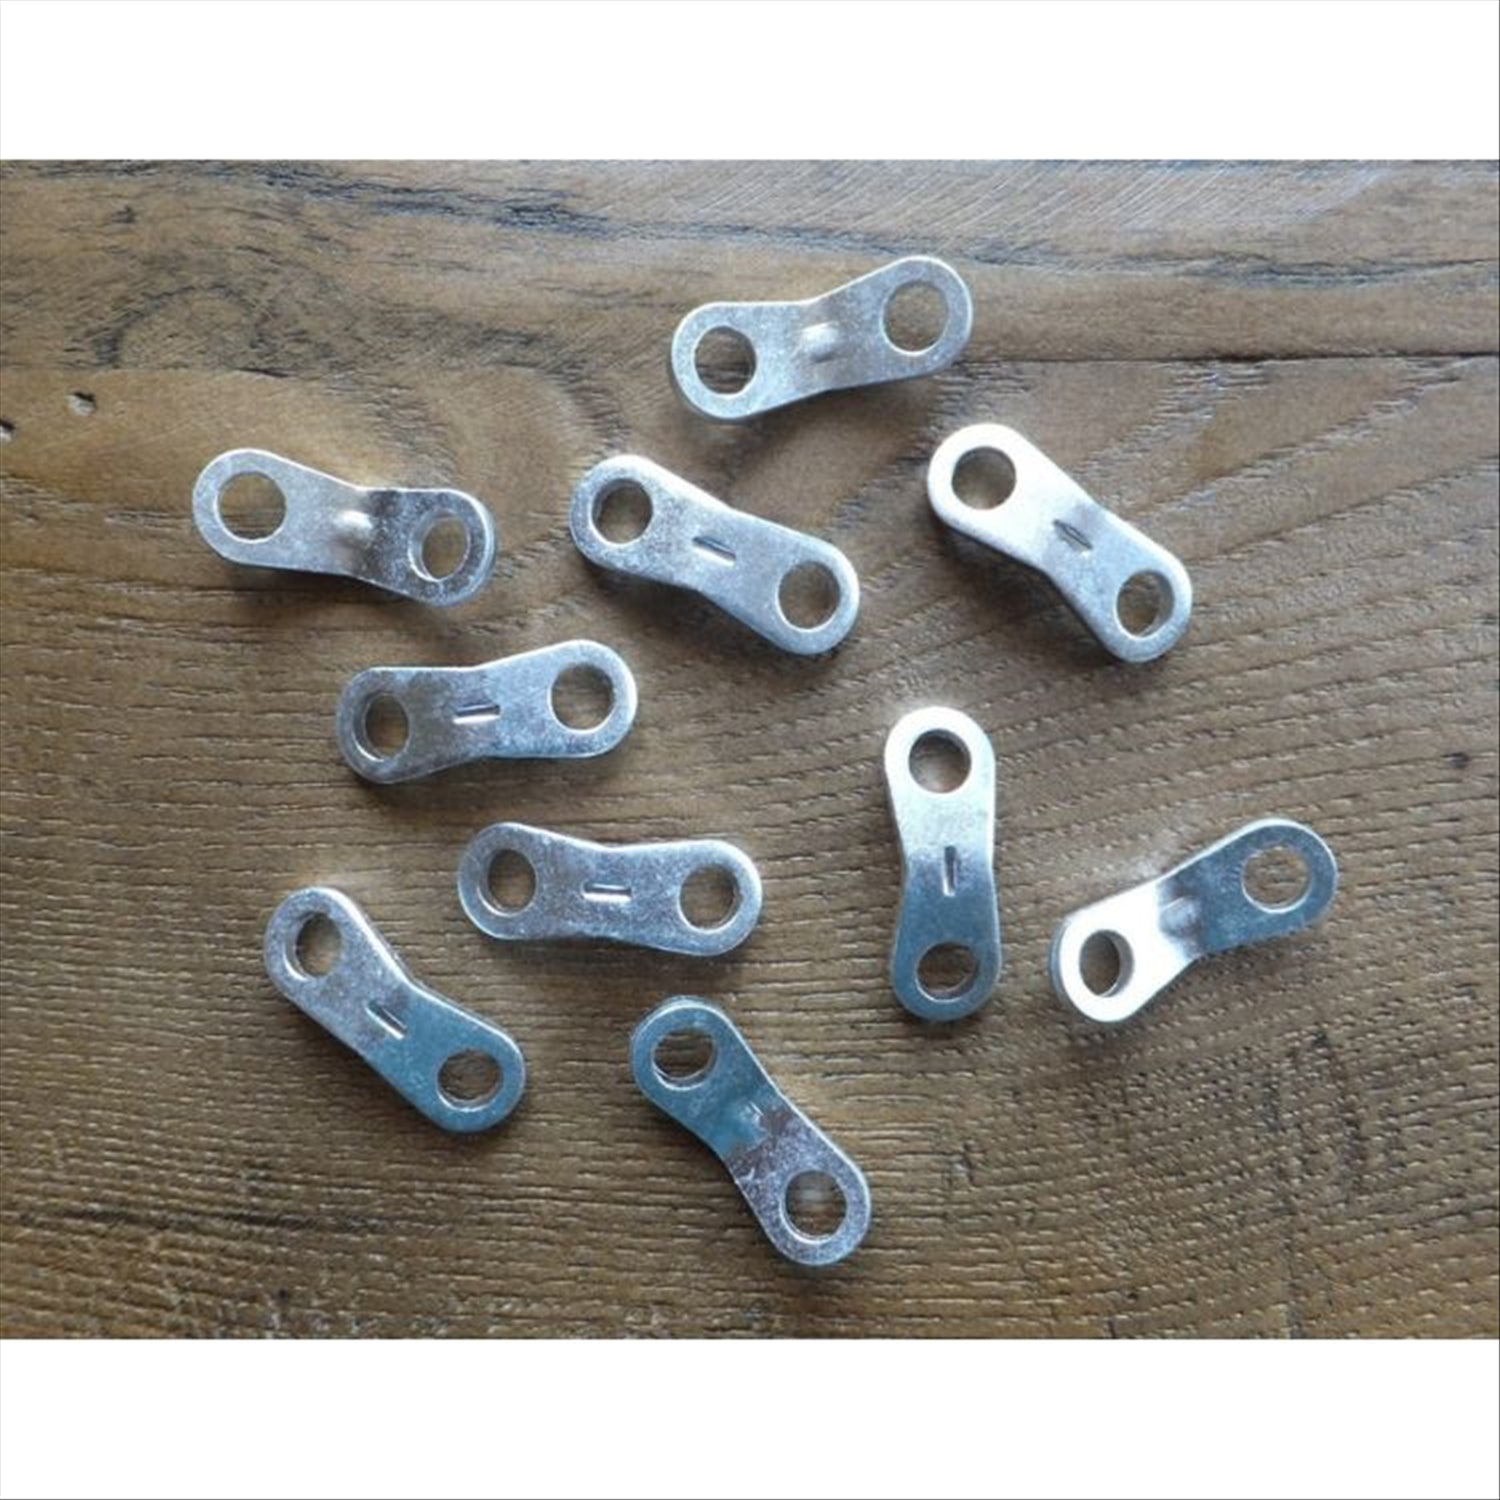 Intents Tensioners - Aluminium for 6-8mm guy rope